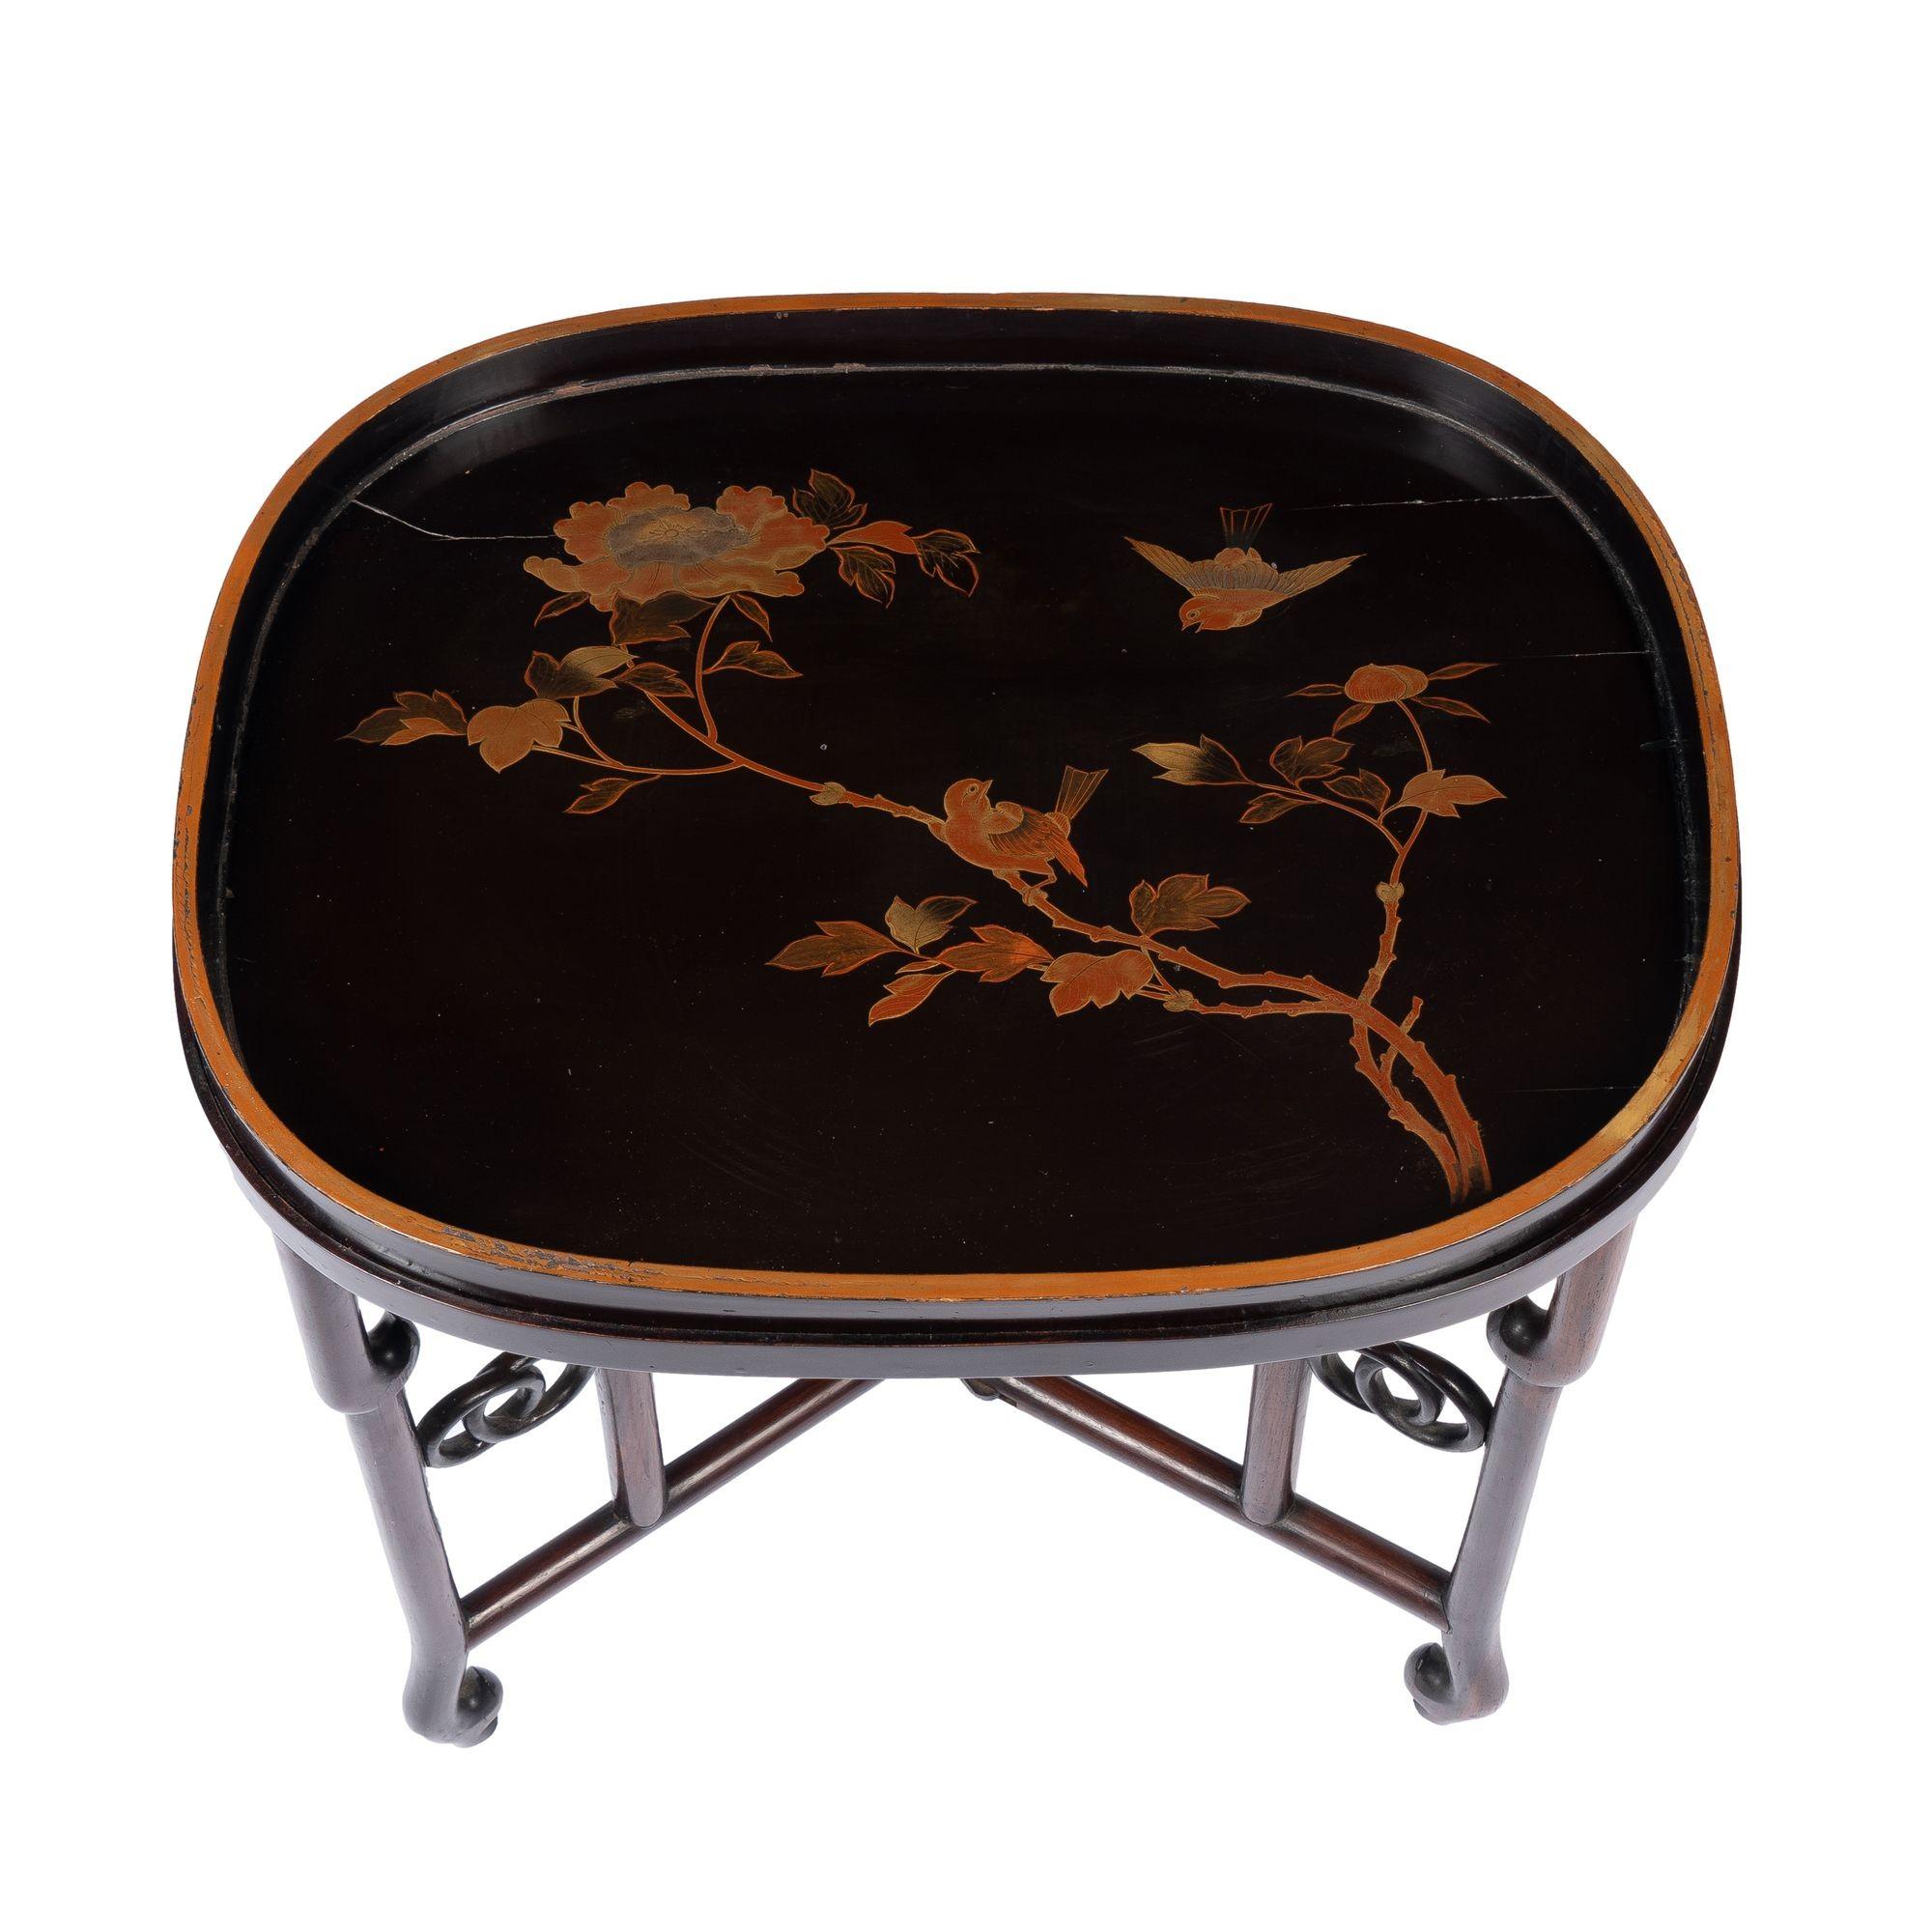 Japanese standing rim, Maki-e lacquered oval wood tray of the Meiji Period. The tray features fine gilt decoration in the form of two small birds, possibly sparrows, fluttering among peony branches. The tray is fitted to a custom rim on a Chinese